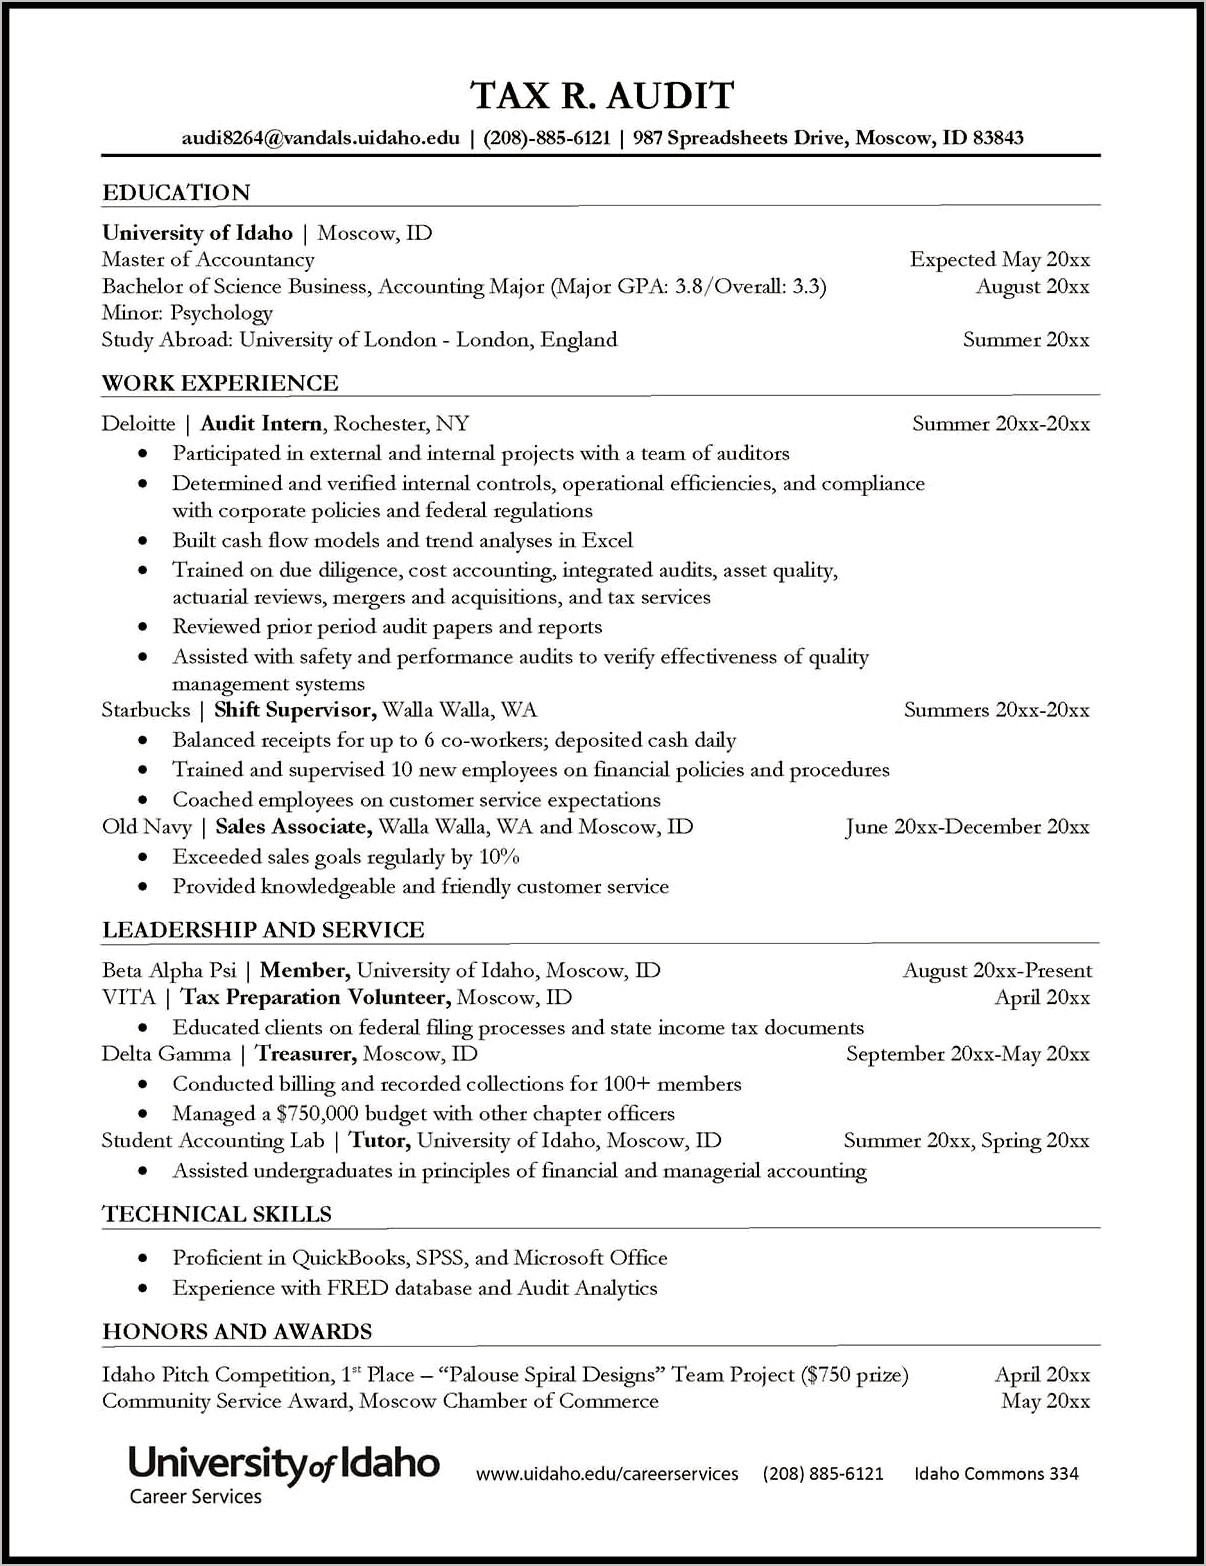 Sample Resume With Honors And Awards